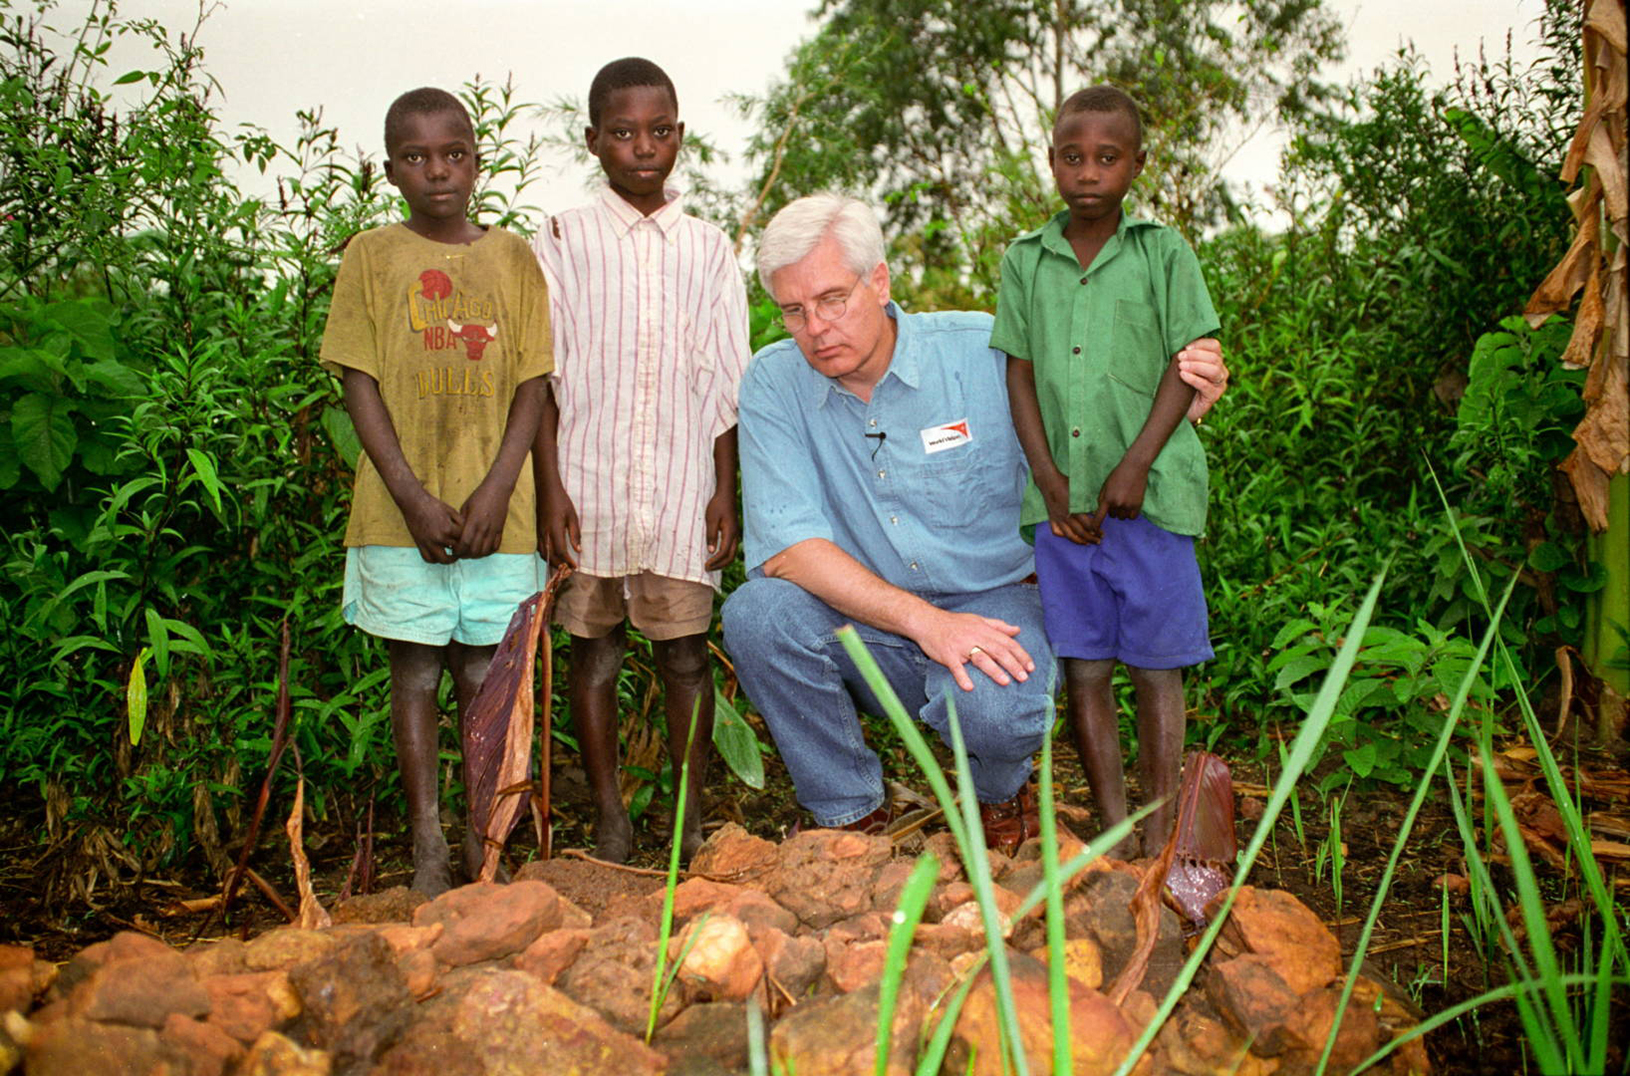 Rich Stearns visited Uganda in August 1998 to meet his sponsored child Richard Sseremba and his two brothers, orphans who lost their parents to AIDS. (© 1998 World Vision/photo by Jon Warren)